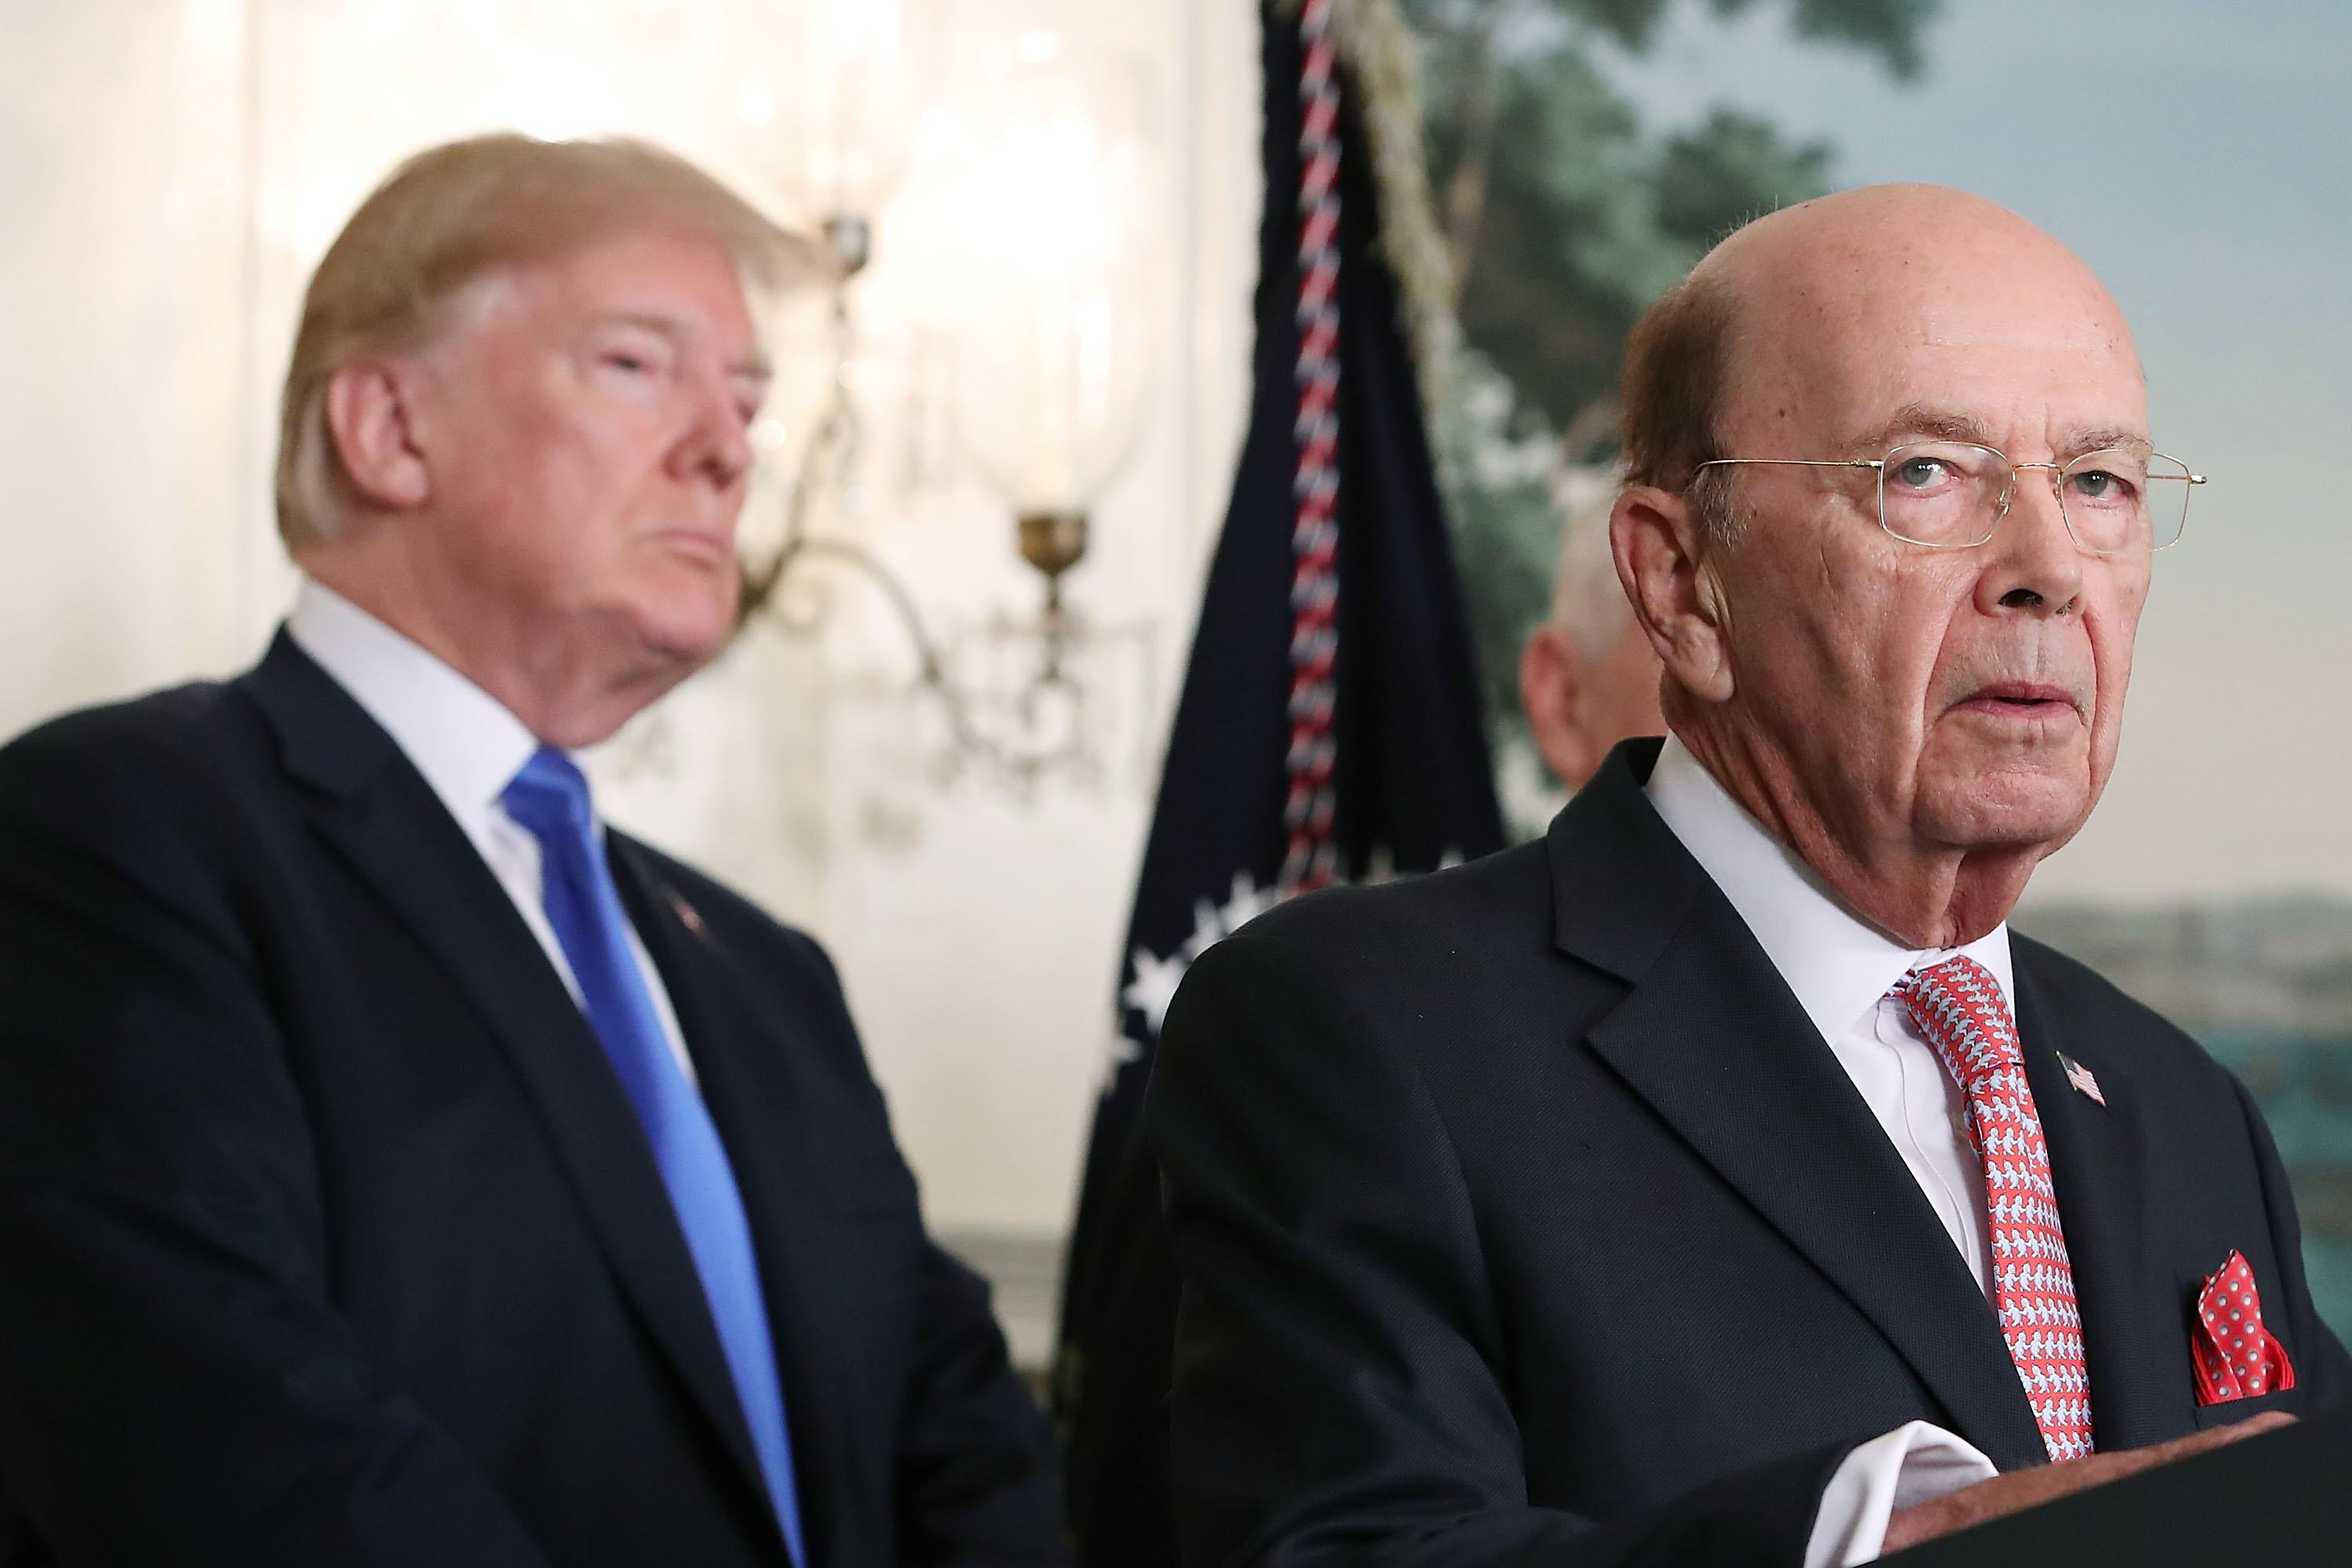 WASHINGTON, DC - MARCH 22: Commerce Secretary Wilbur Ross (R) speaks before U.S. President Donald Trump signed a presidential memorandum aimed at what he calls Chinese economic aggression in the Roosevelt Room at the White House on March 22, 2018 in Washington, DC.  (Photo by Mark Wilson/Getty Images)